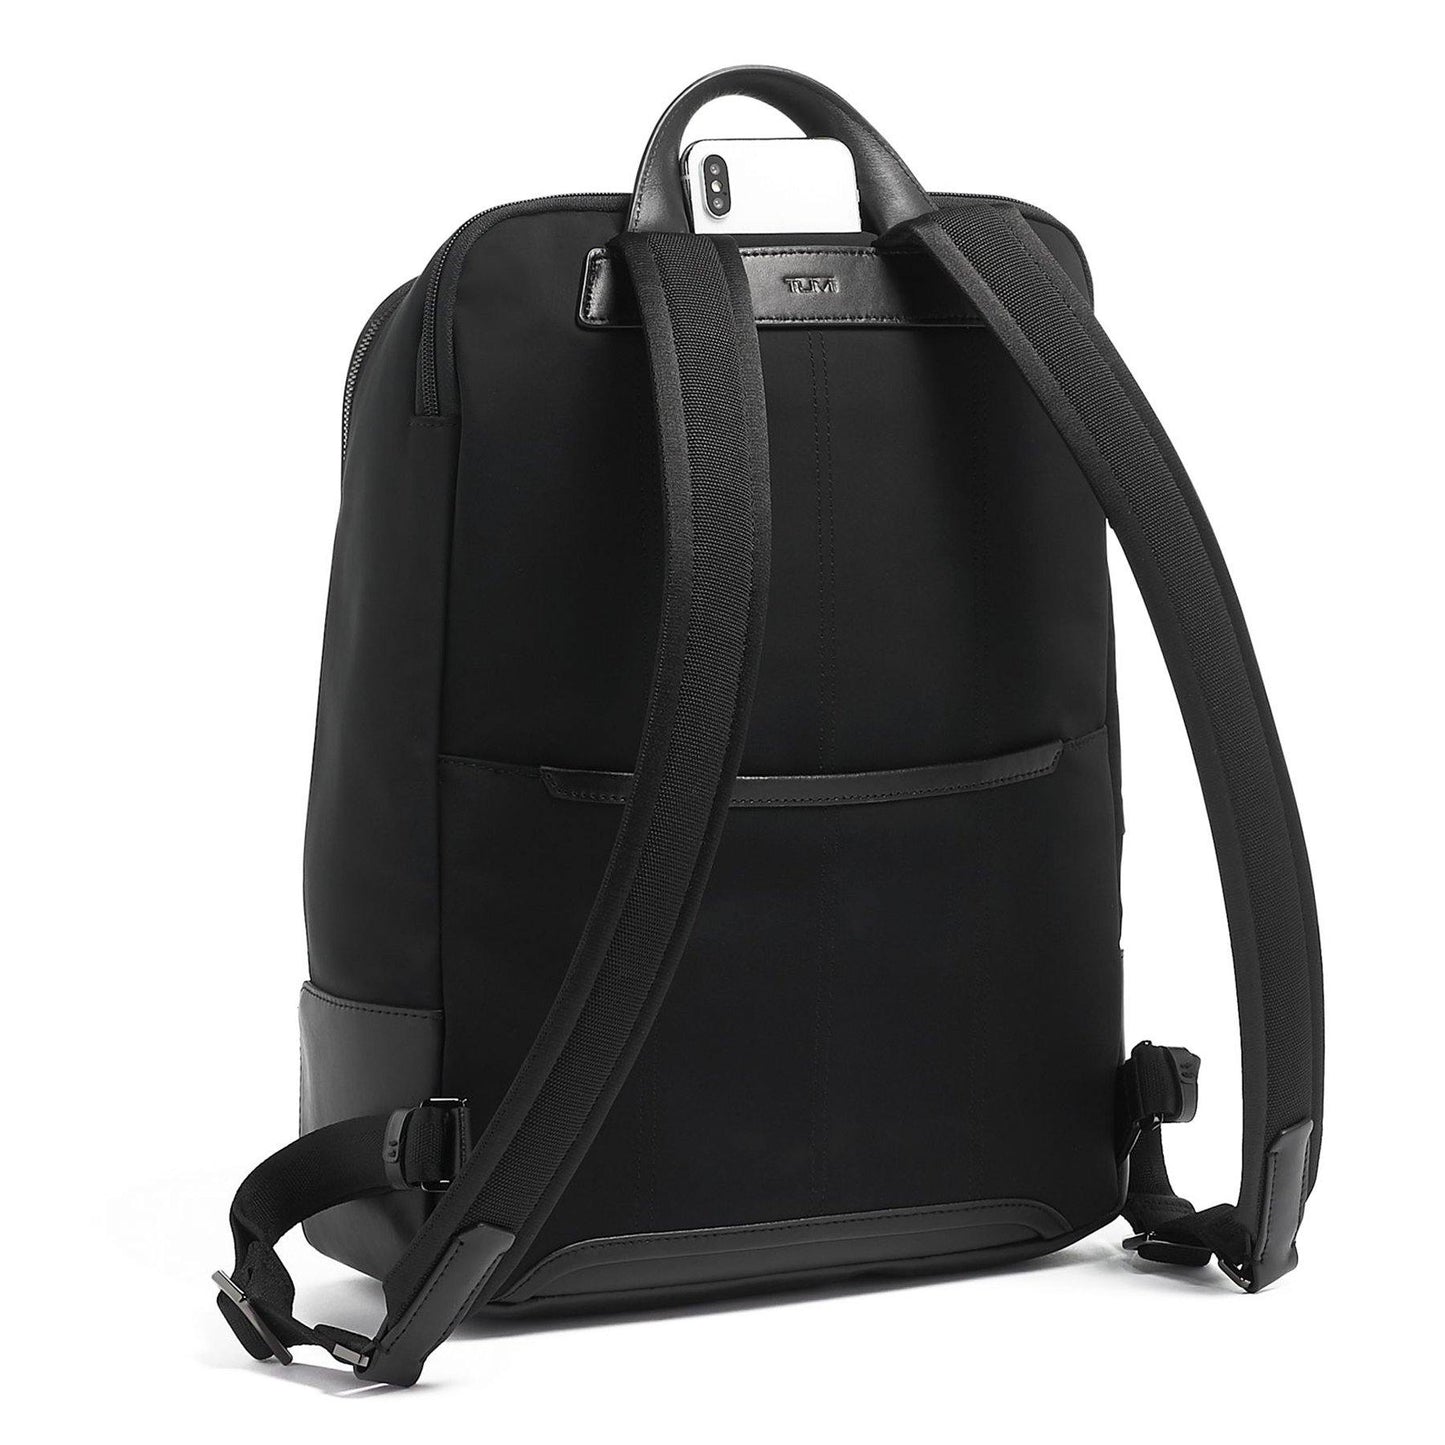 Harrison William Backpack 06602010D - Cosmos Boutique New Jersey